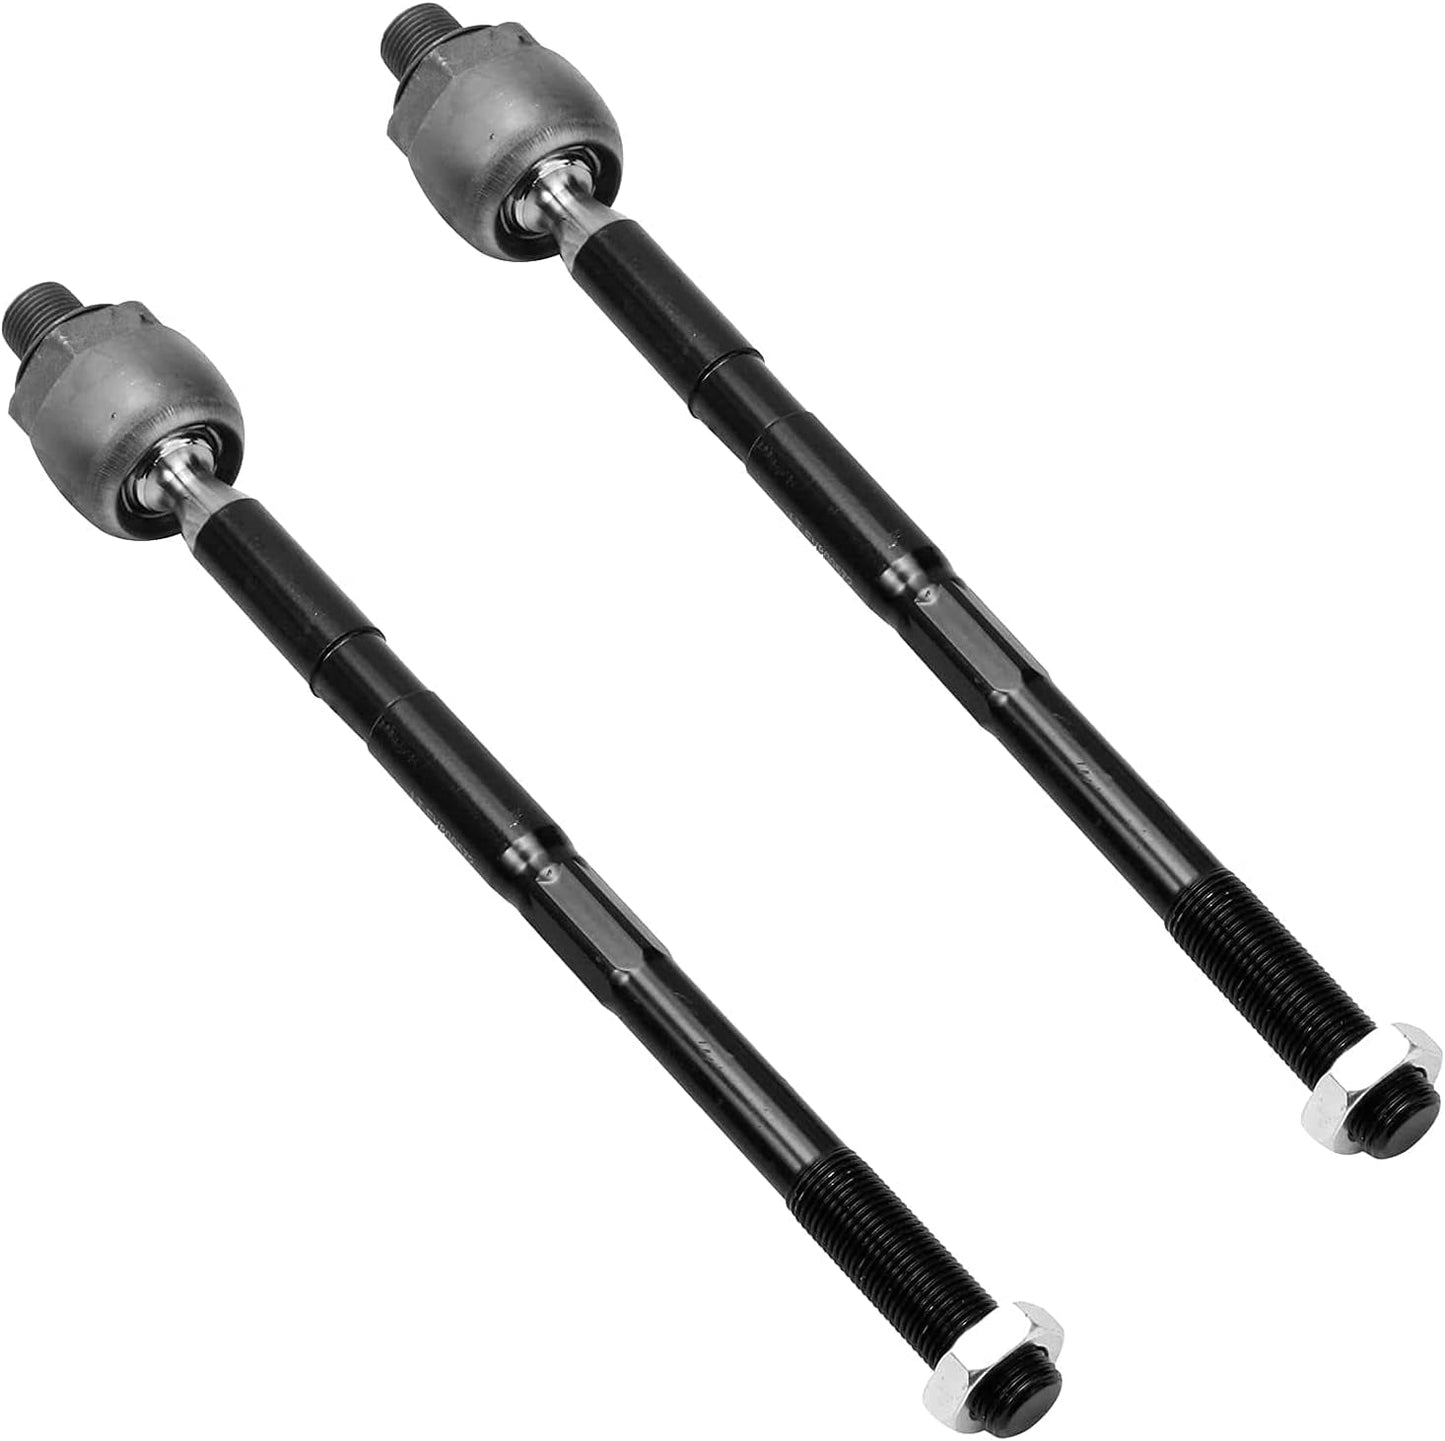 Detroit Axle - 4 Front Tie Rods for 2008-2017 Chevrolet Traverse Buick Enclave 2007-2016 GMC Acadia Saturn Outlook Inner & Outer Tie Rods 2009 2010 2011 2012 2013 2014 2015 Replacement